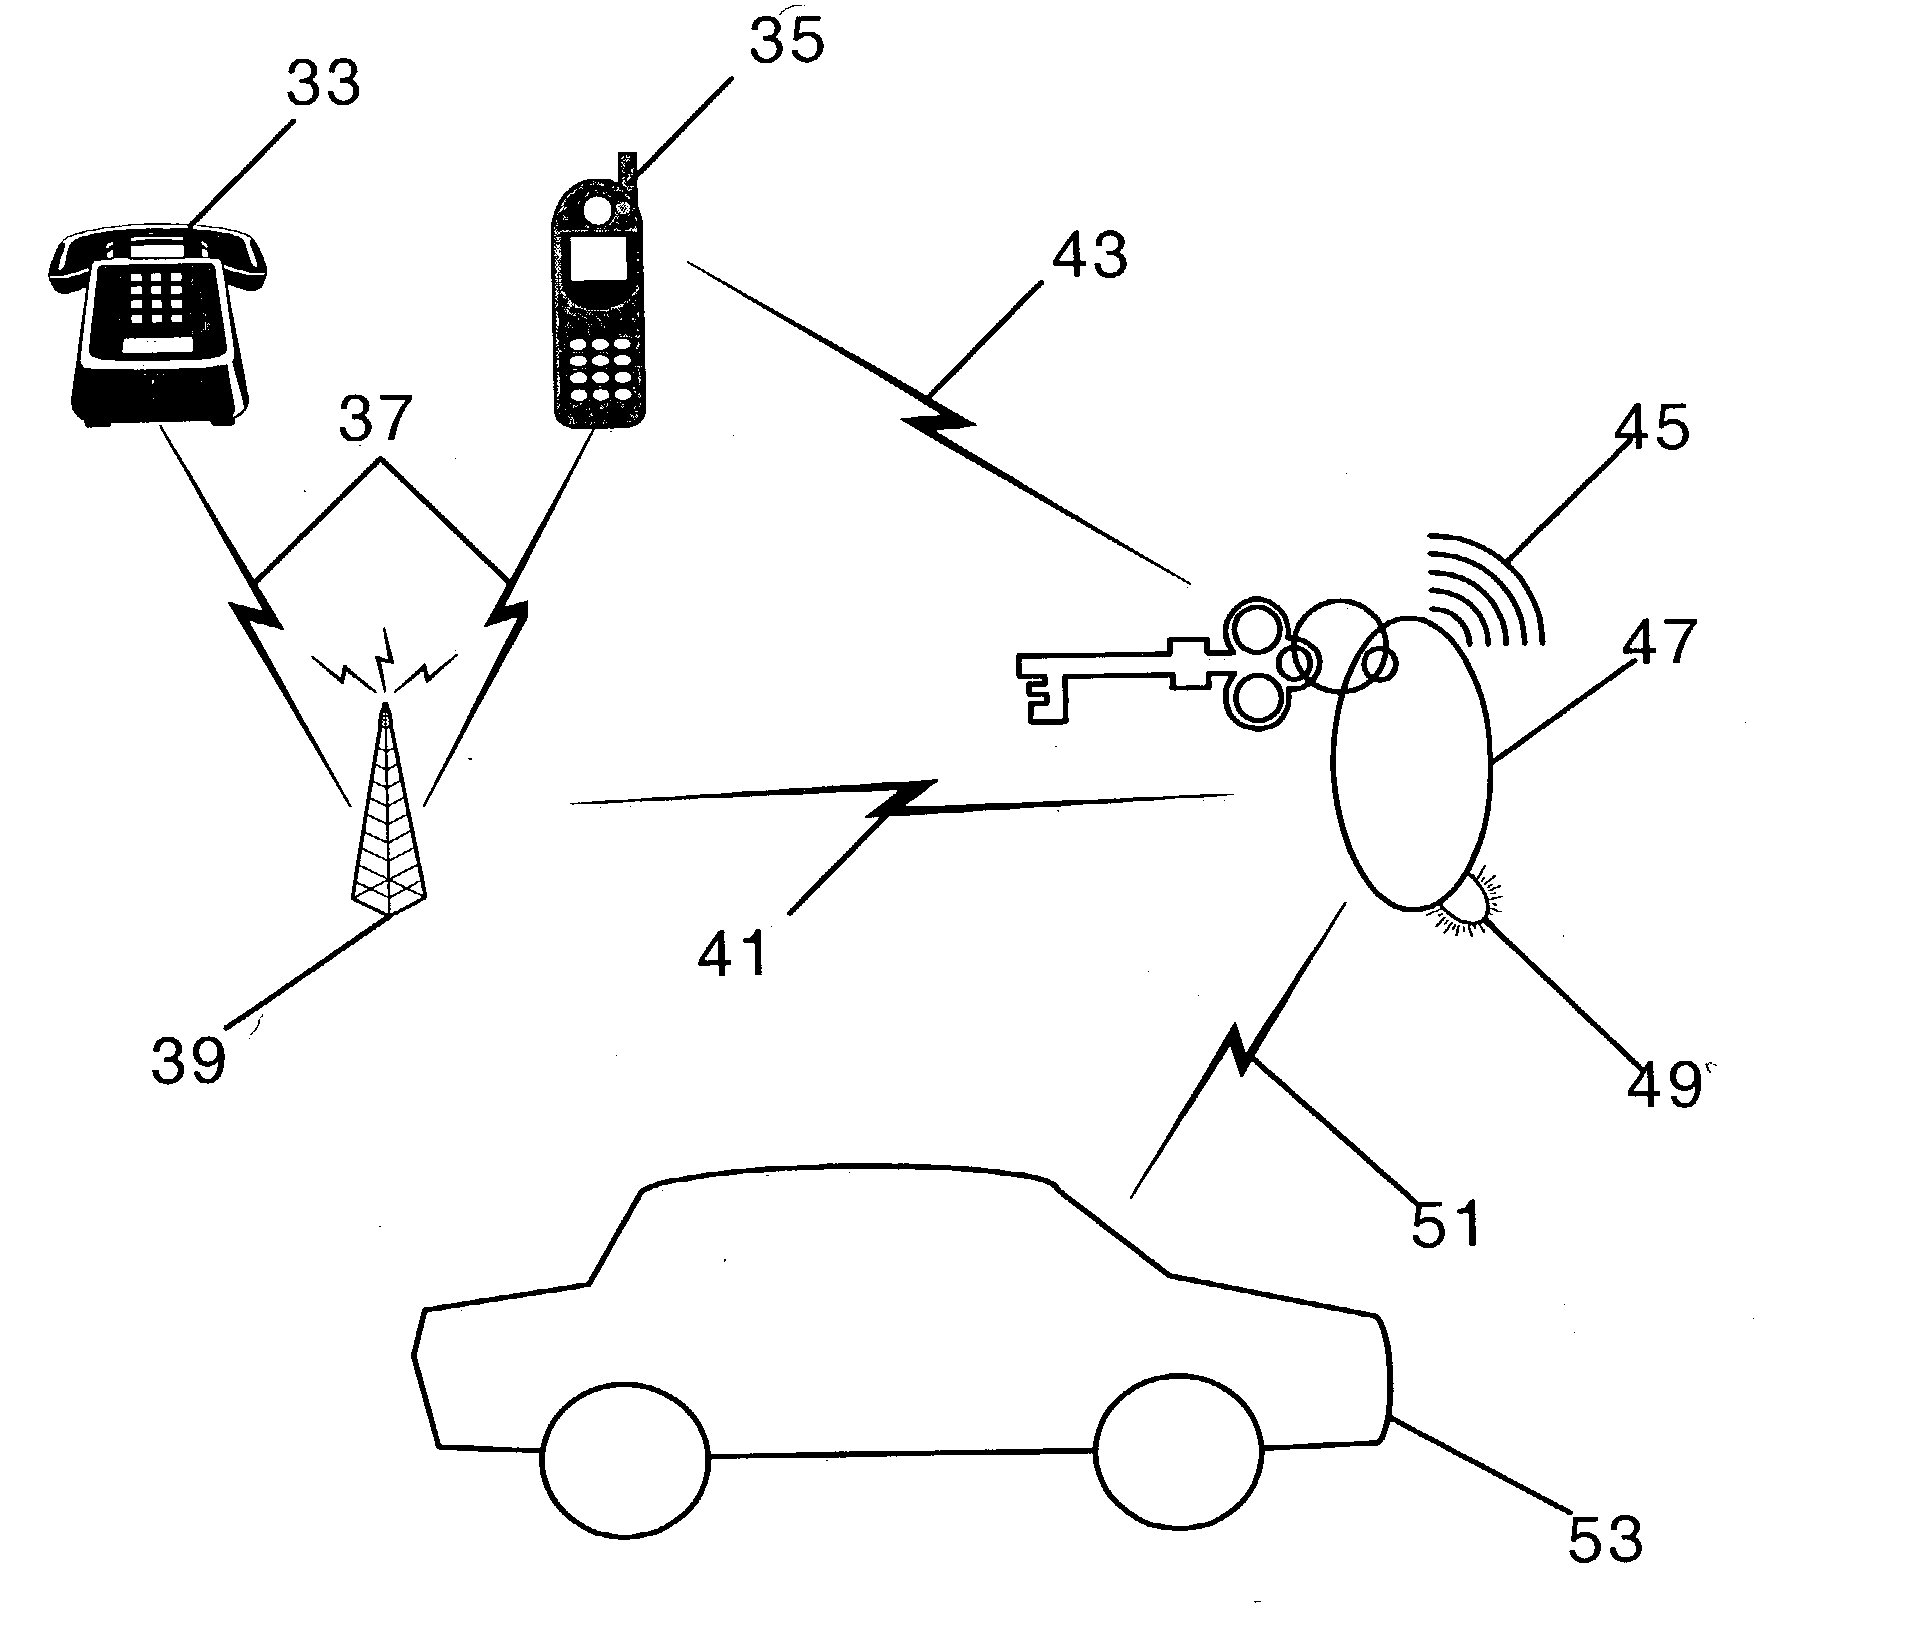 Location device and wireless mulitfuntion key-fob system